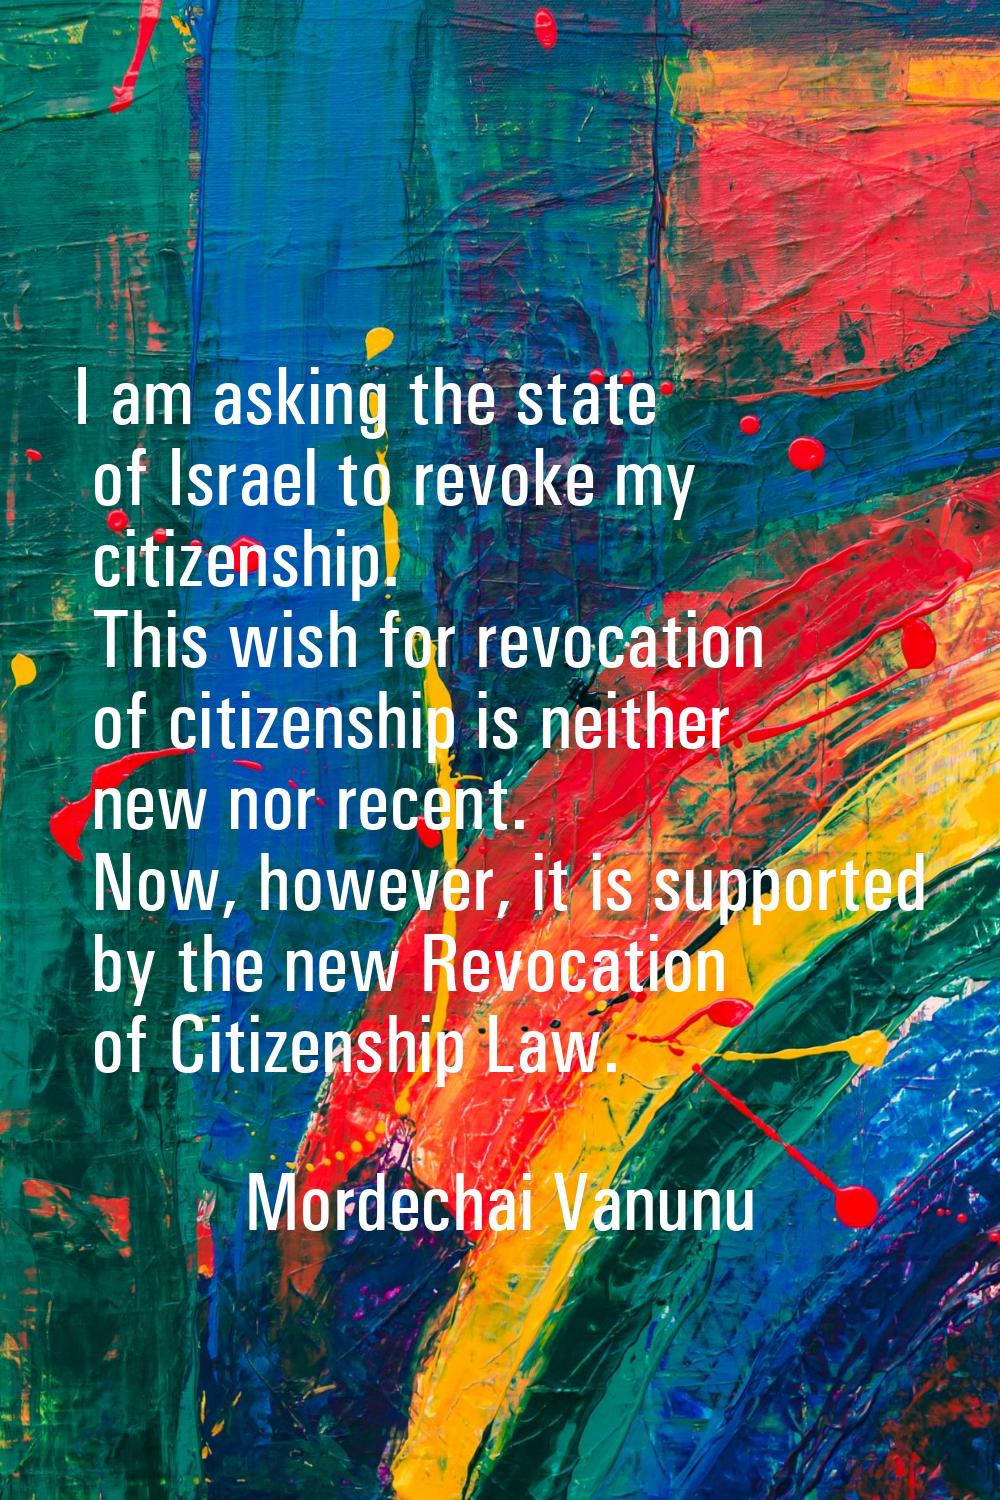 I am asking the state of Israel to revoke my citizenship. This wish for revocation of citizenship i